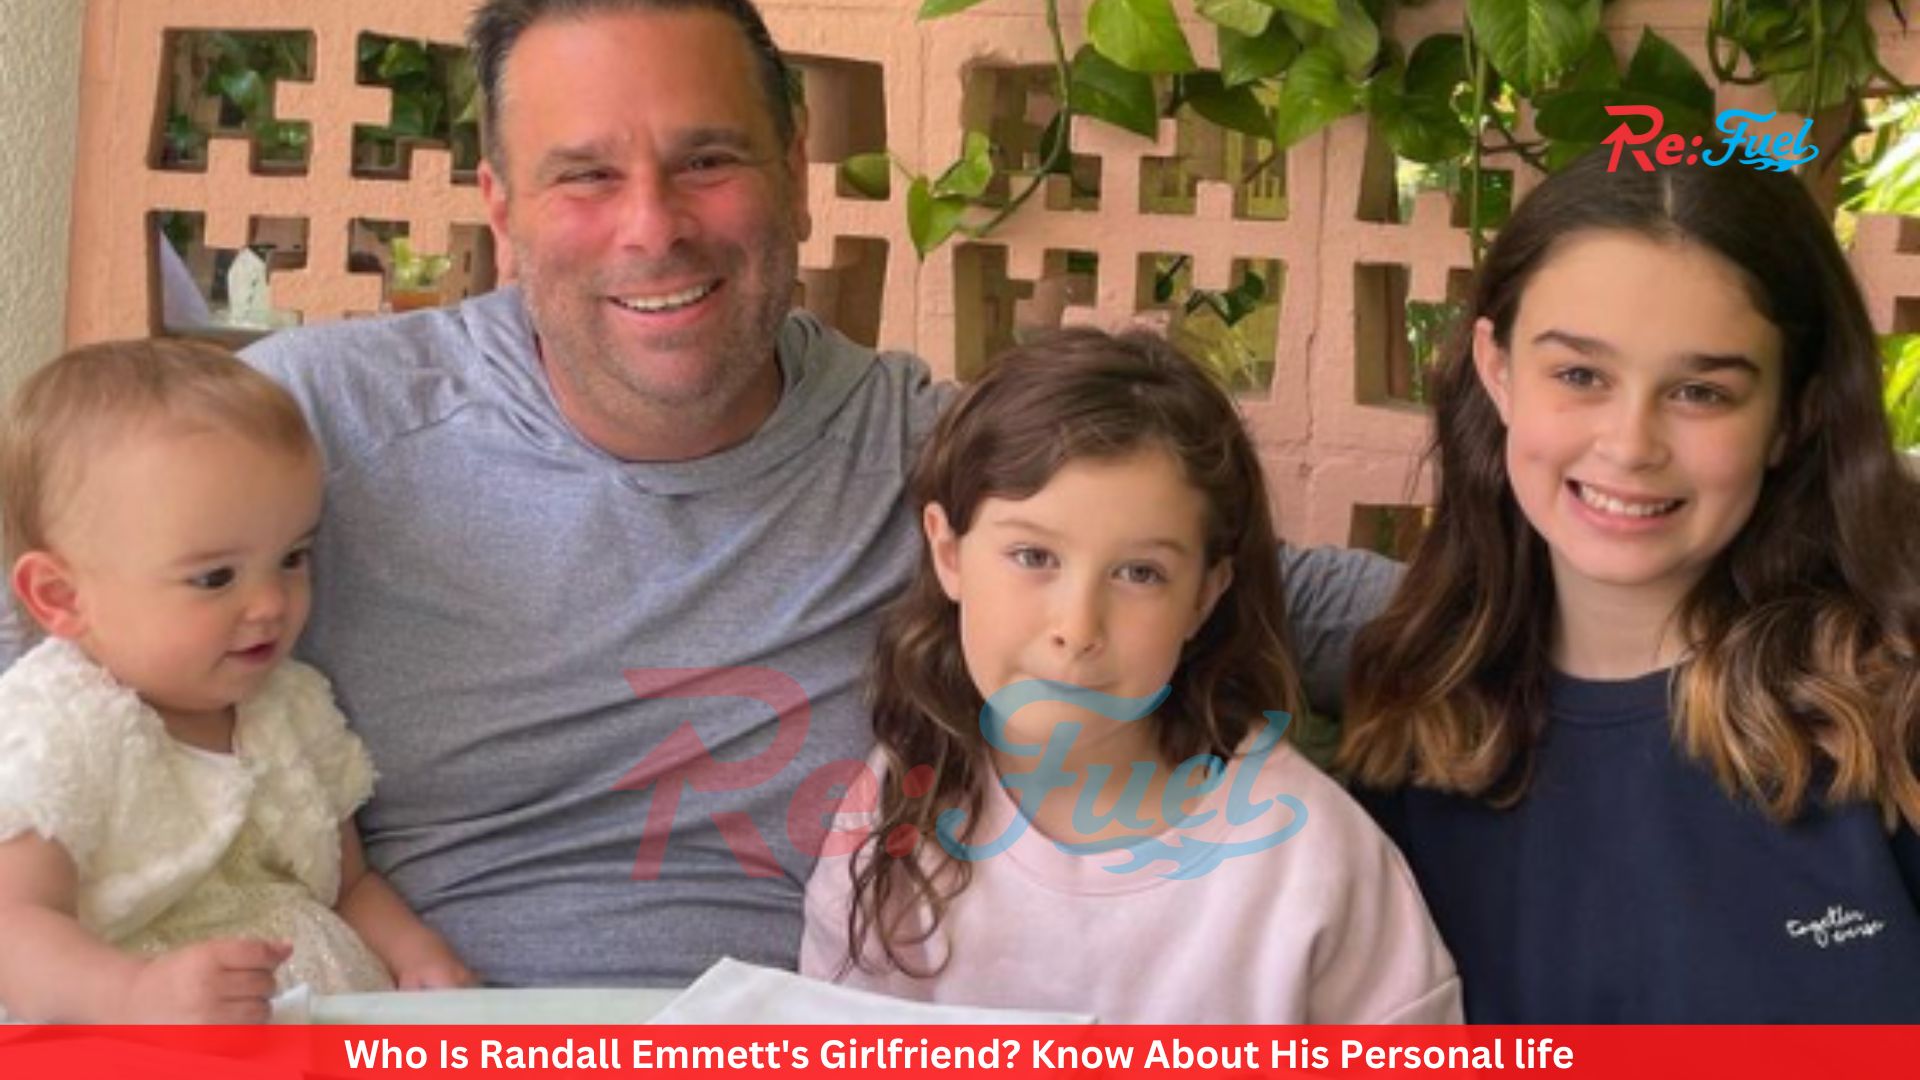 Who Is Randall Emmett's Girlfriend? Know About His Personal life